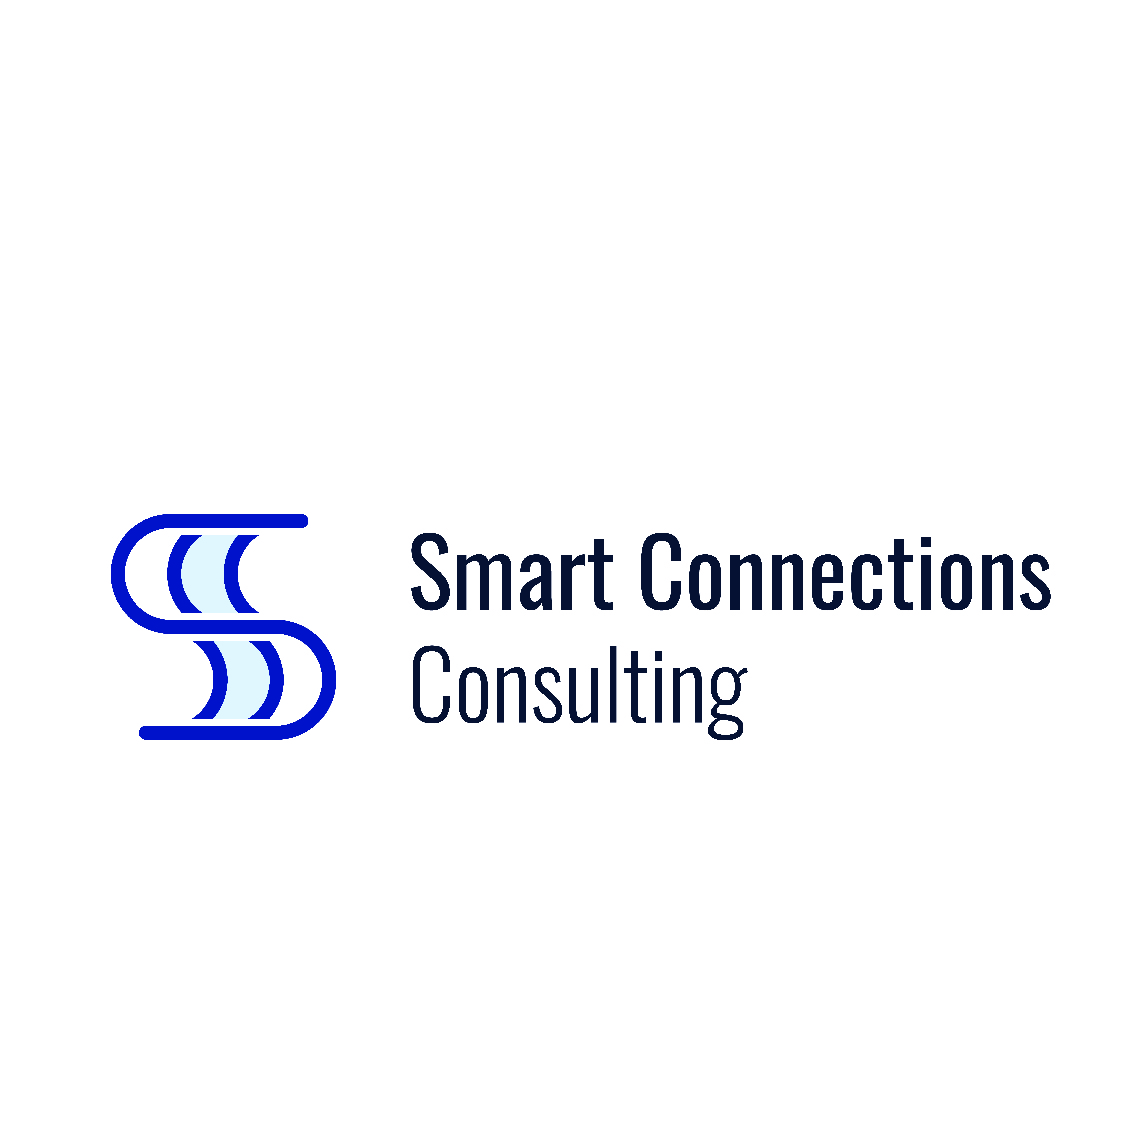 Smart Connections Consulting